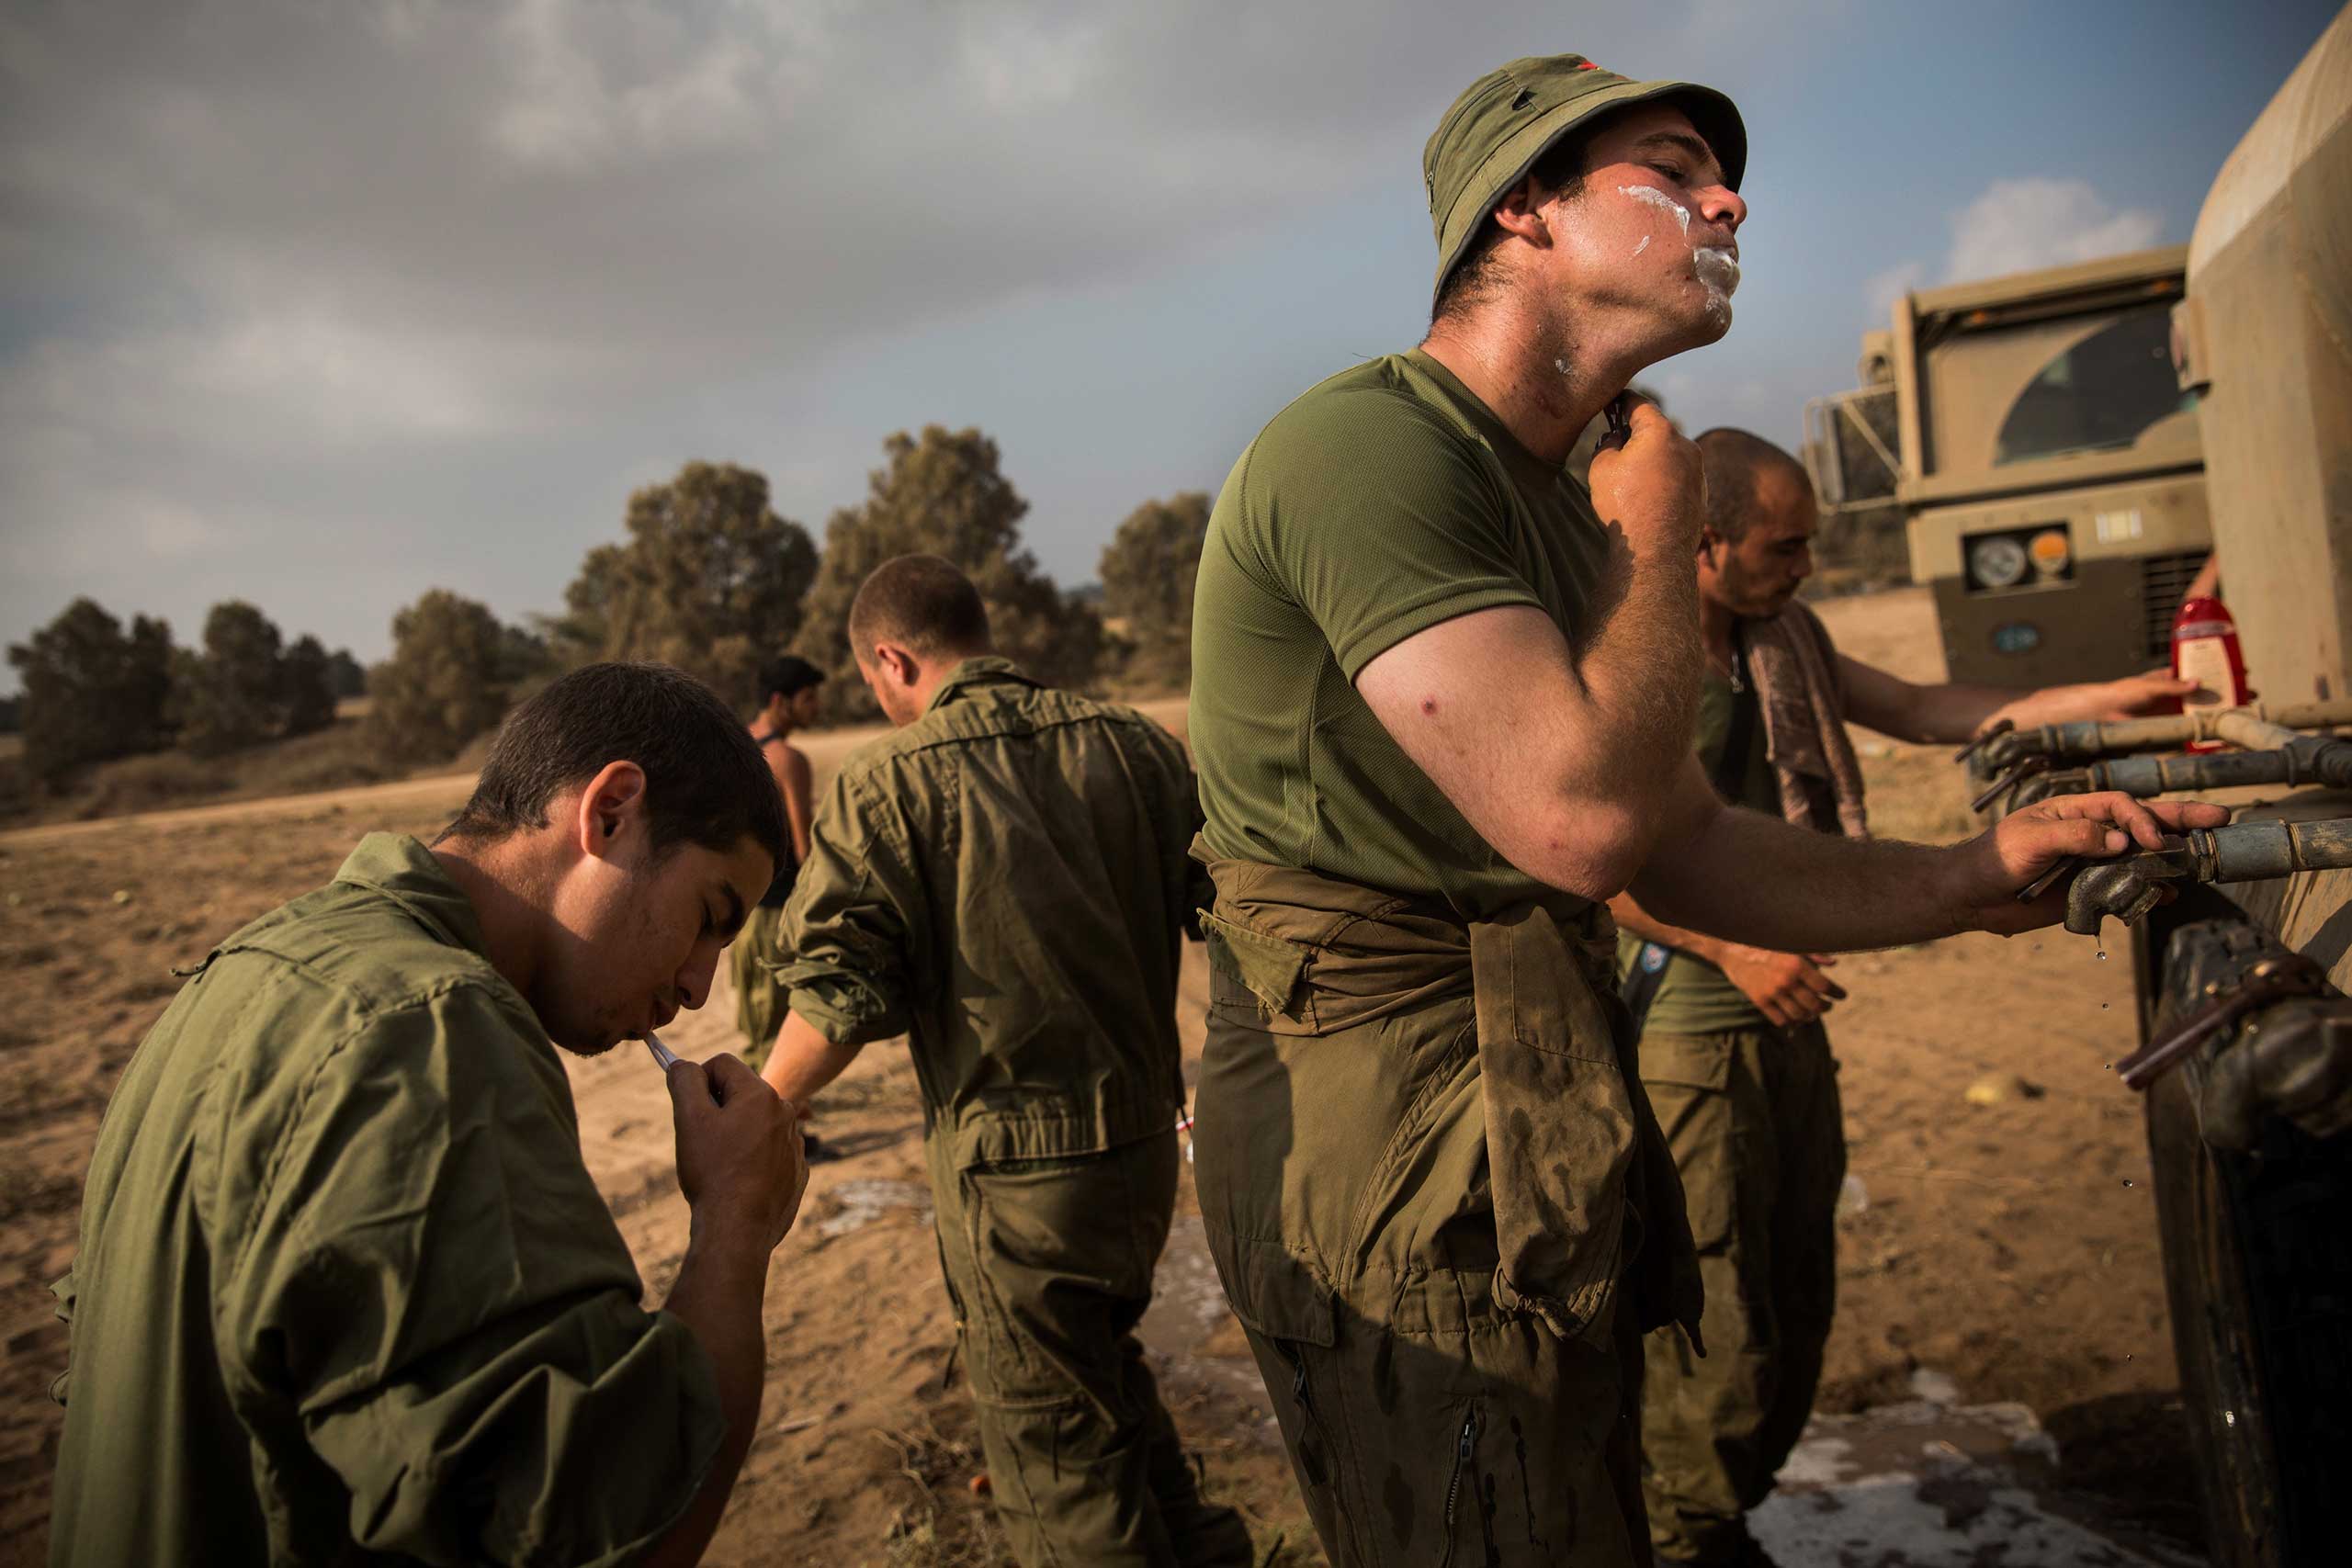 An Israeli soldier shaves near Kafar Azza, Israel on the morning of July 28, 2014.